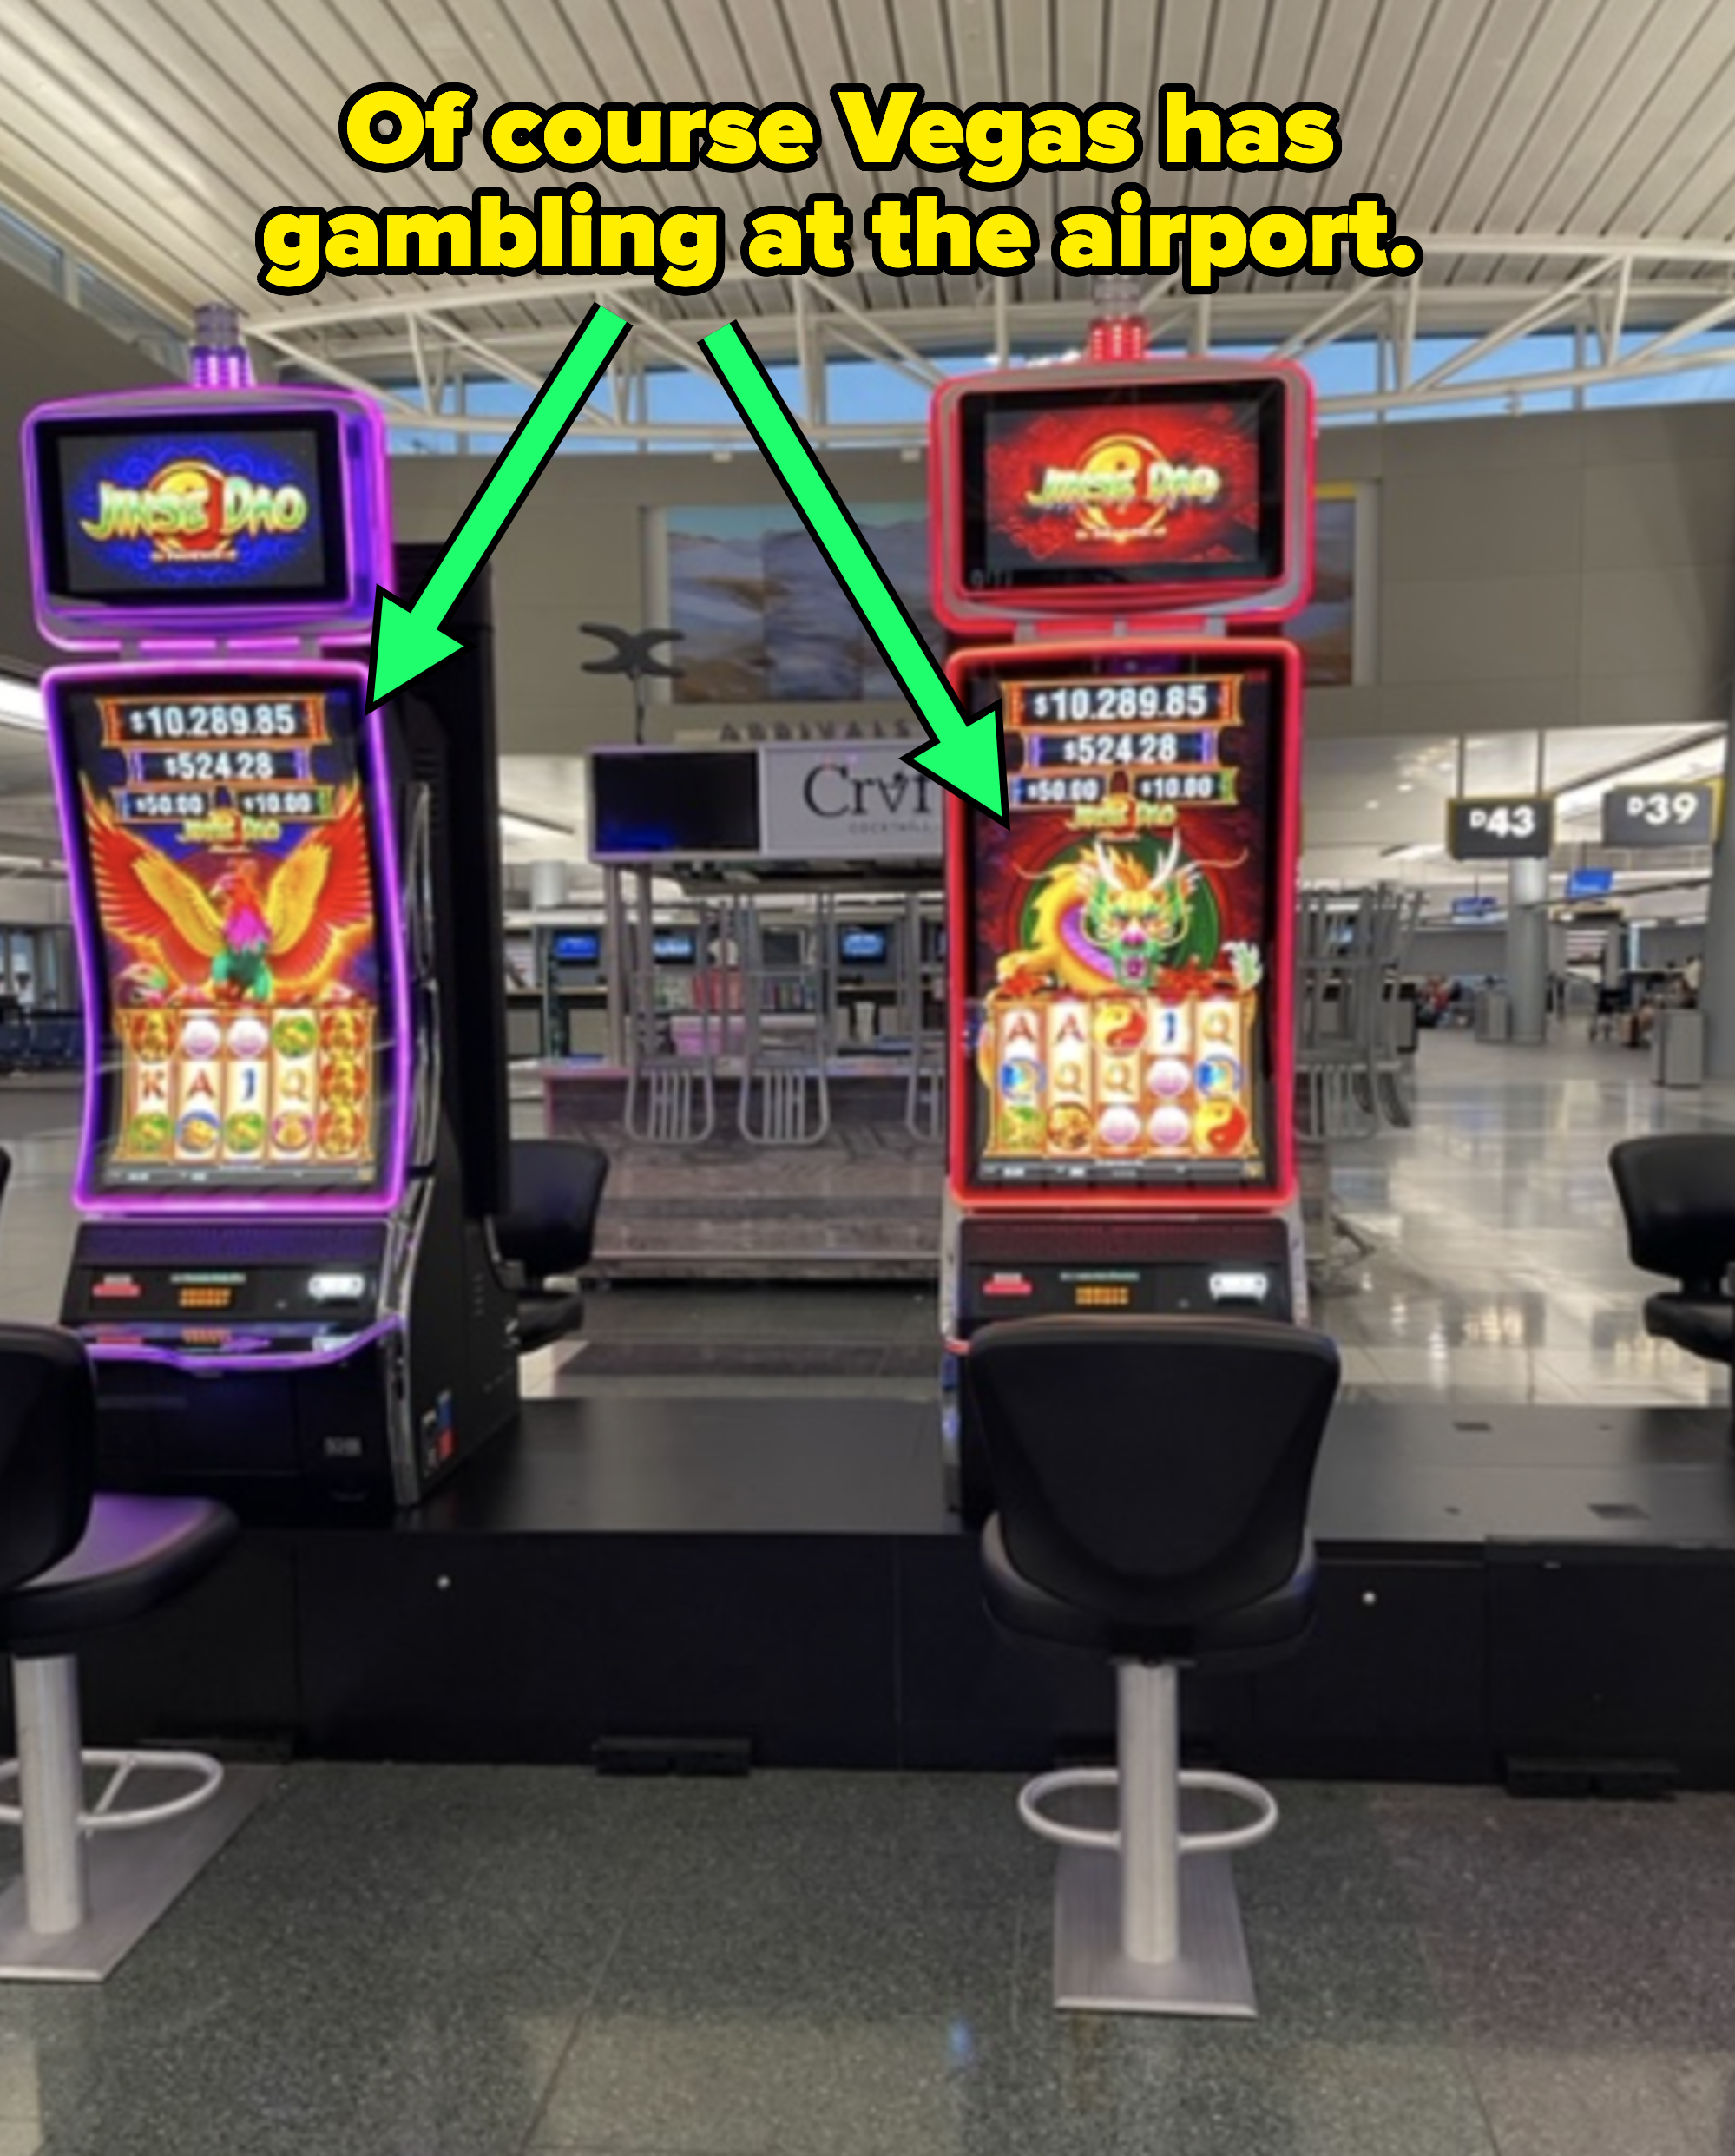 Las Vegas slot machines at the airport during the solo trip